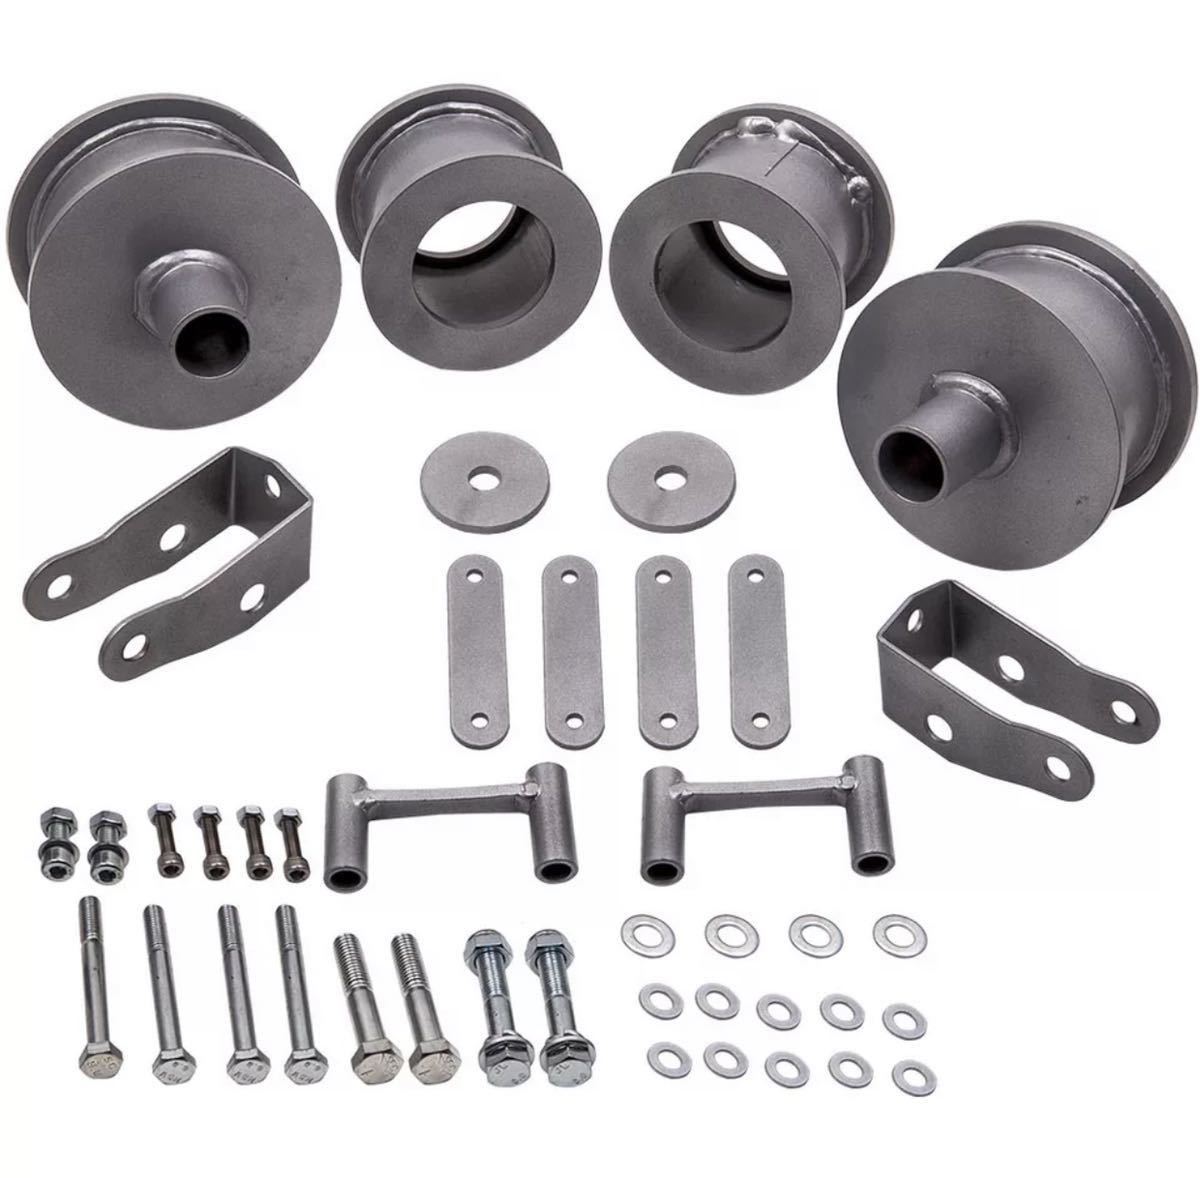  Wrangler jk 2007y-2018y front rear 2 -inch lift up kit vehicle height Jeep shock spacer 